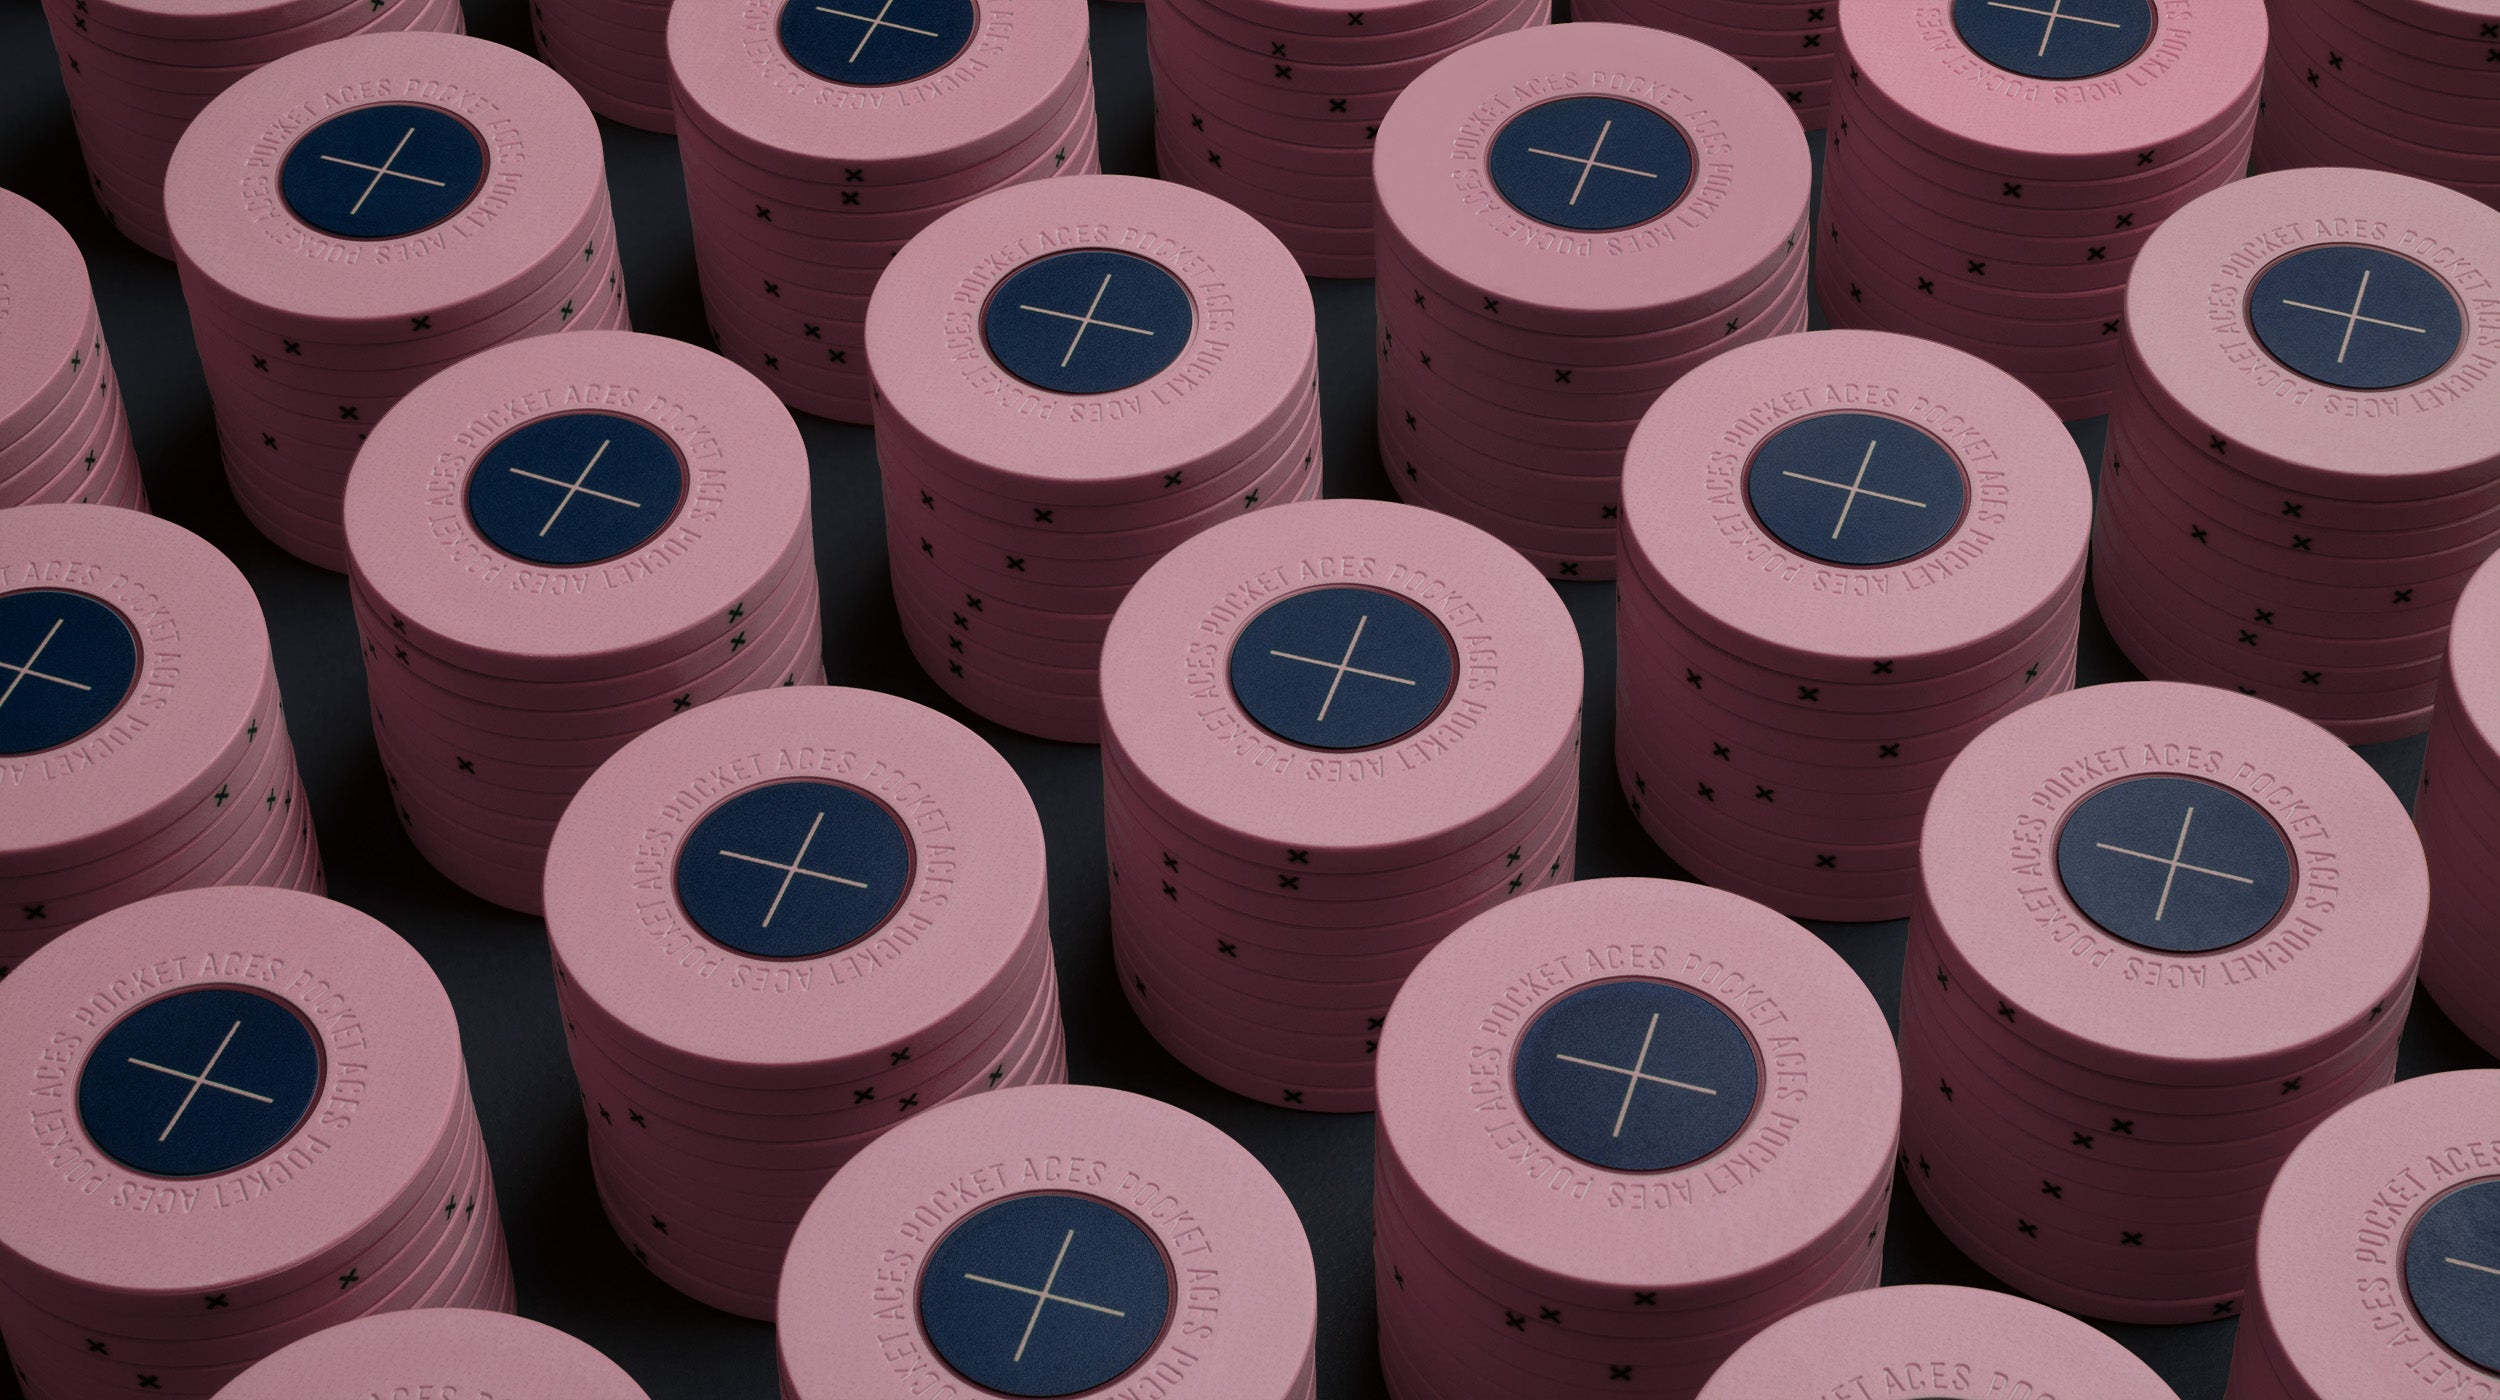 Rows of eraser colored poker chips on a table